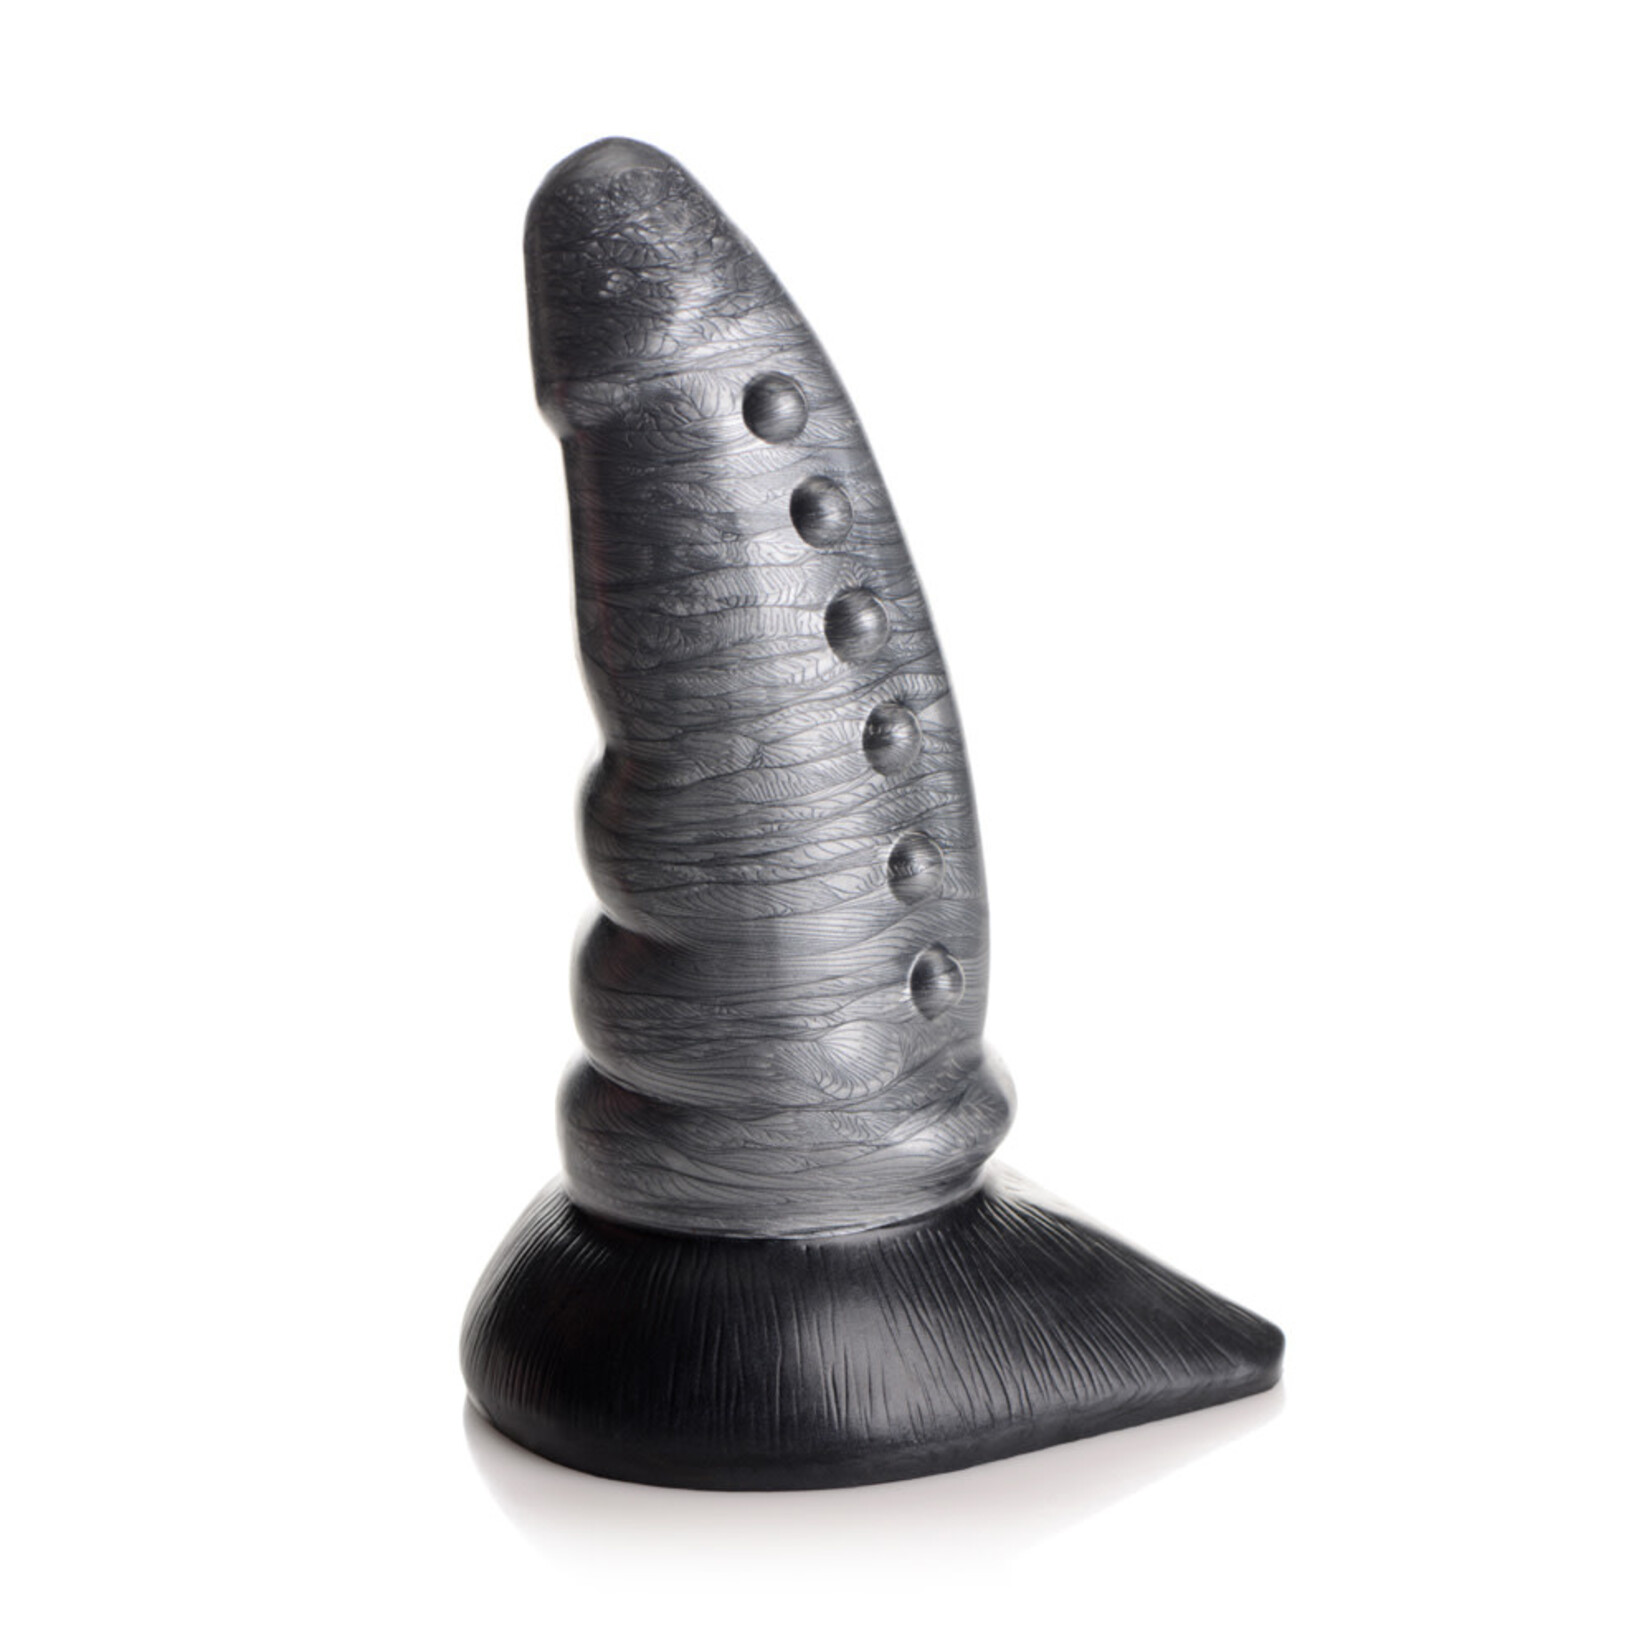 XR BRANDS CREATURE COCKS - BEASTLY TAPERED BUMPY SILICONE DILDO